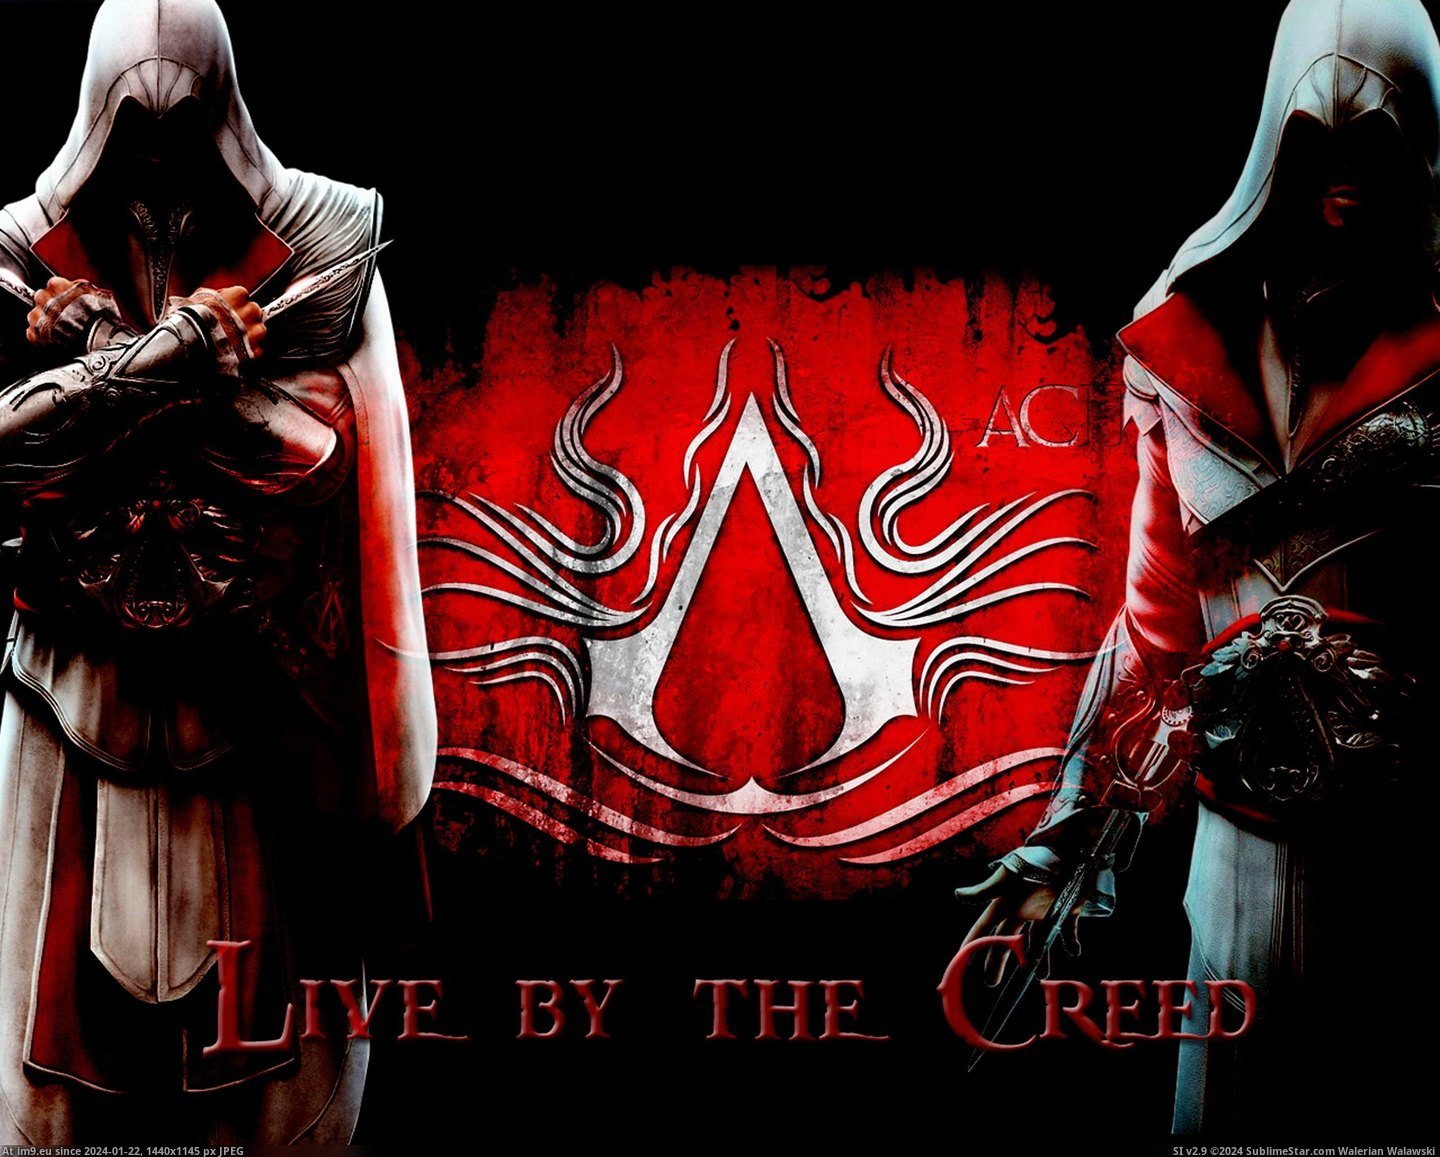 #Game #Creed #Assassin #Video Video Game Assassin'S Creed 195657 Pic. (Bild von album Games Wallpapers))